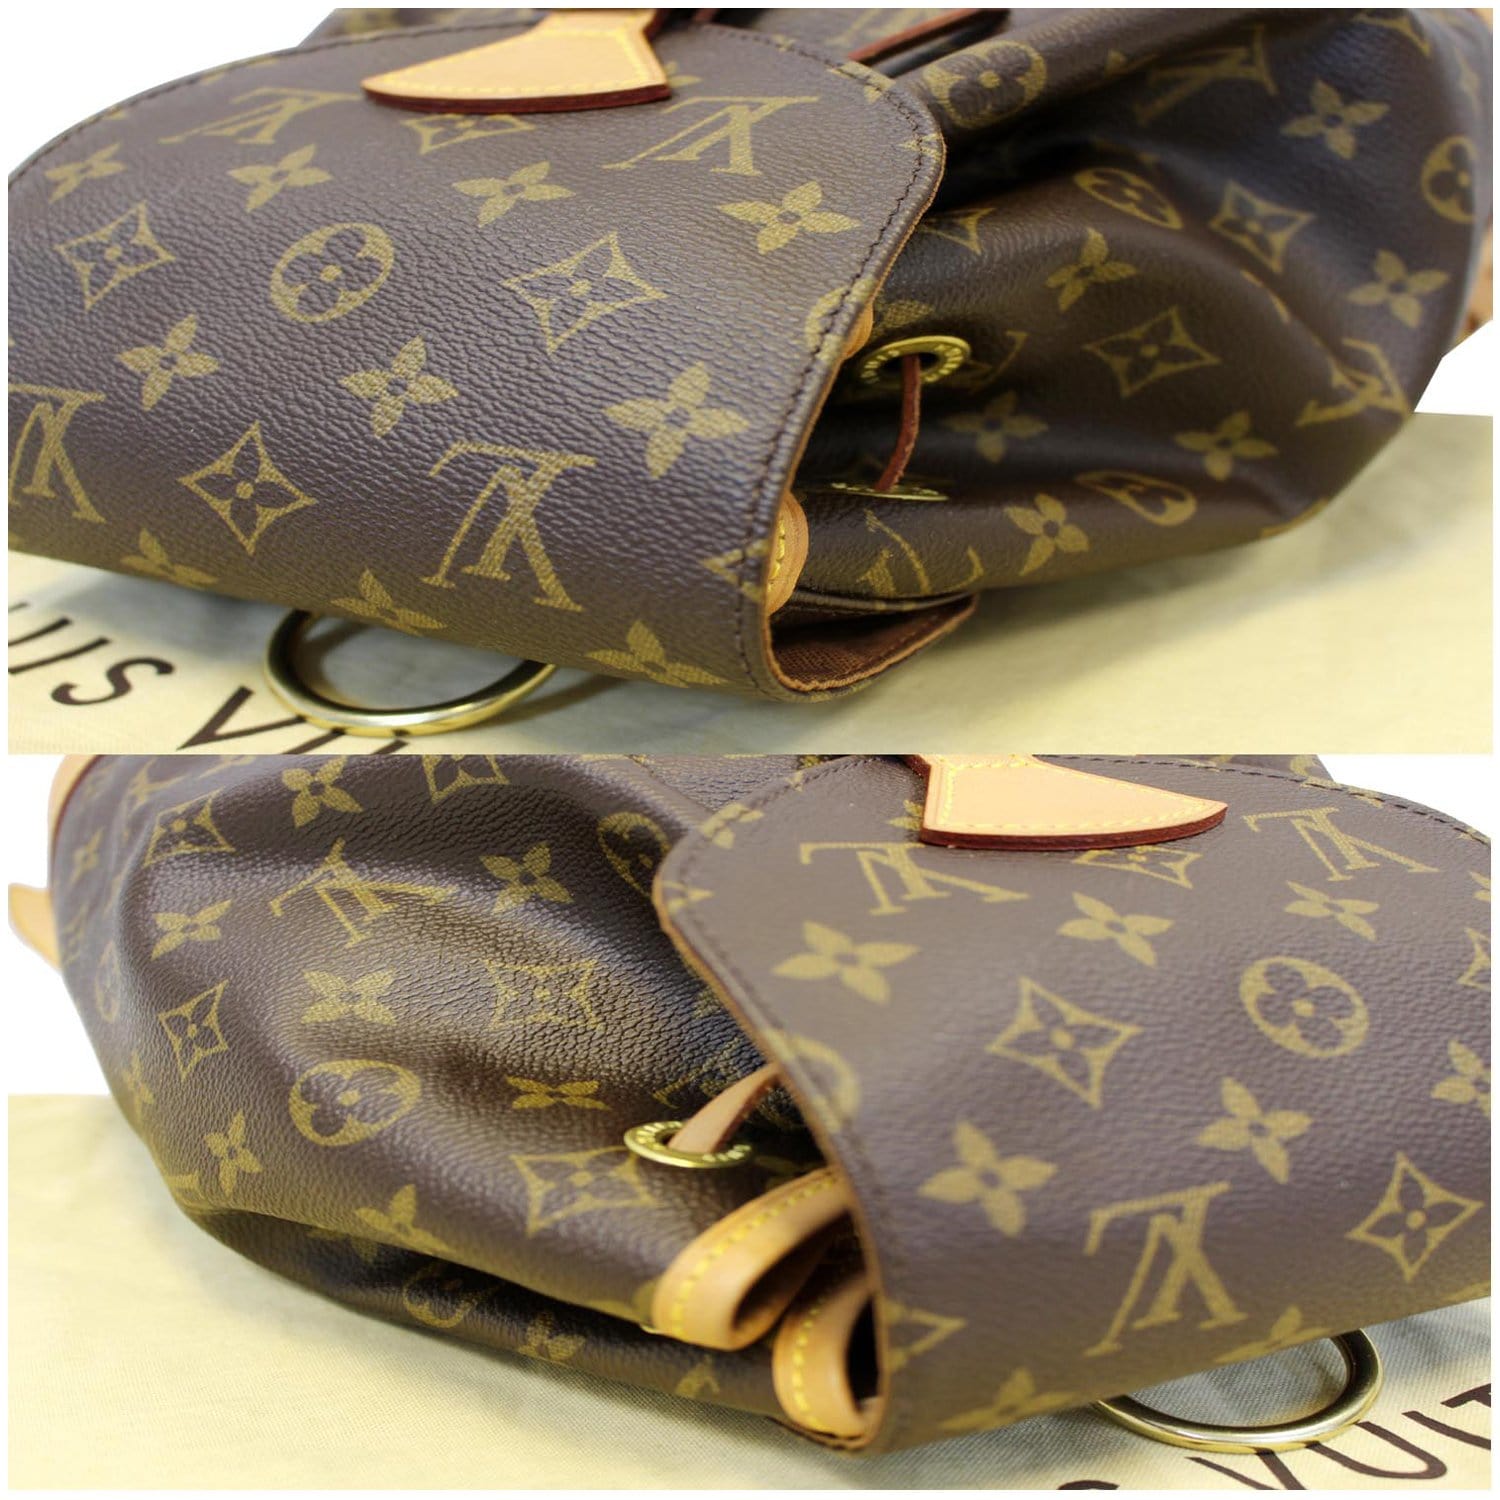 How to Treat & Protect Louis Vuitton Bag - New and Old LV Vachetta Leather,  Nice BB, Multi Pochette 